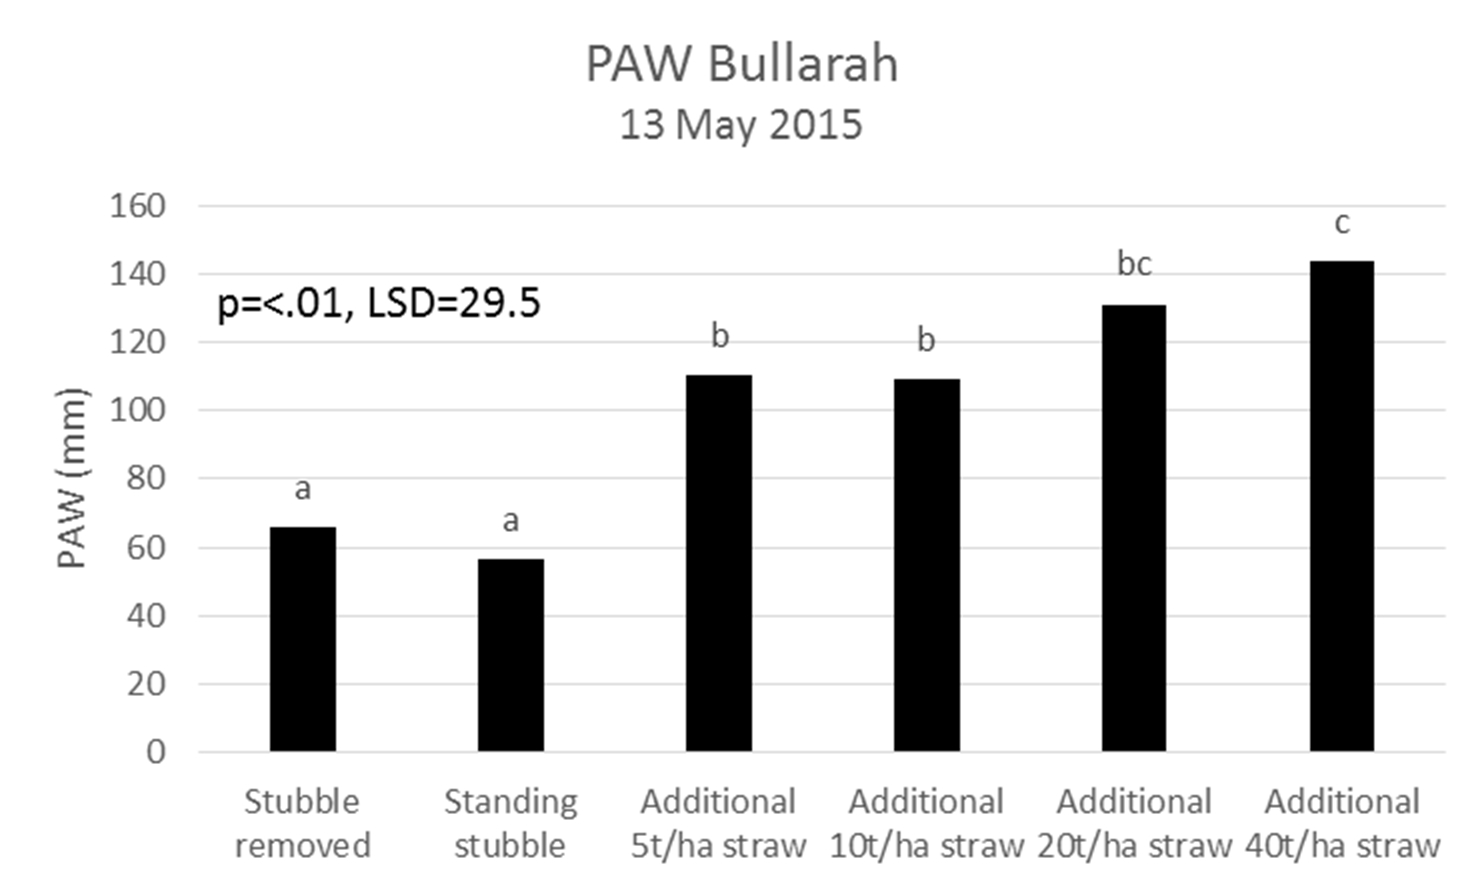 Figure 1. An additional 53mm of PAW was stored where 5t/ha of straw was applied compared to standing stubble alone. Additional 40t/ha straw resulted in extra 87mm PAW compared to the standard standing stubble. Based on water use efficiency (WUE) (wheat) of 15kg/mm/ha, an extra 87mm of PAW could result in an additional 1.3t/ha of grain.